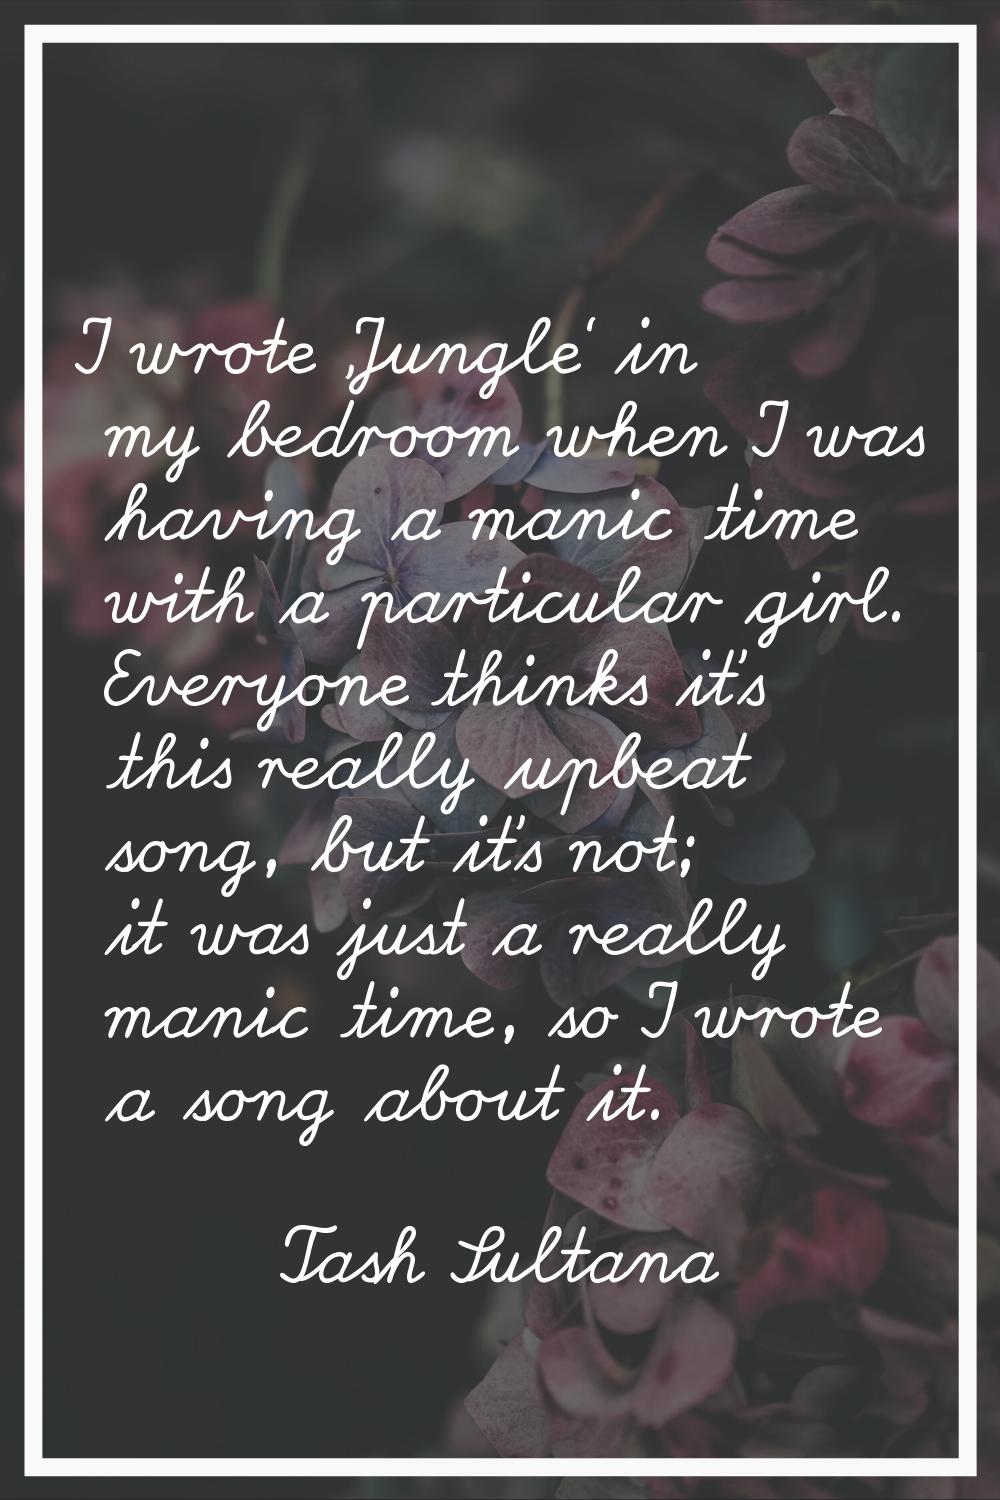 I wrote 'Jungle' in my bedroom when I was having a manic time with a particular girl. Everyone thin